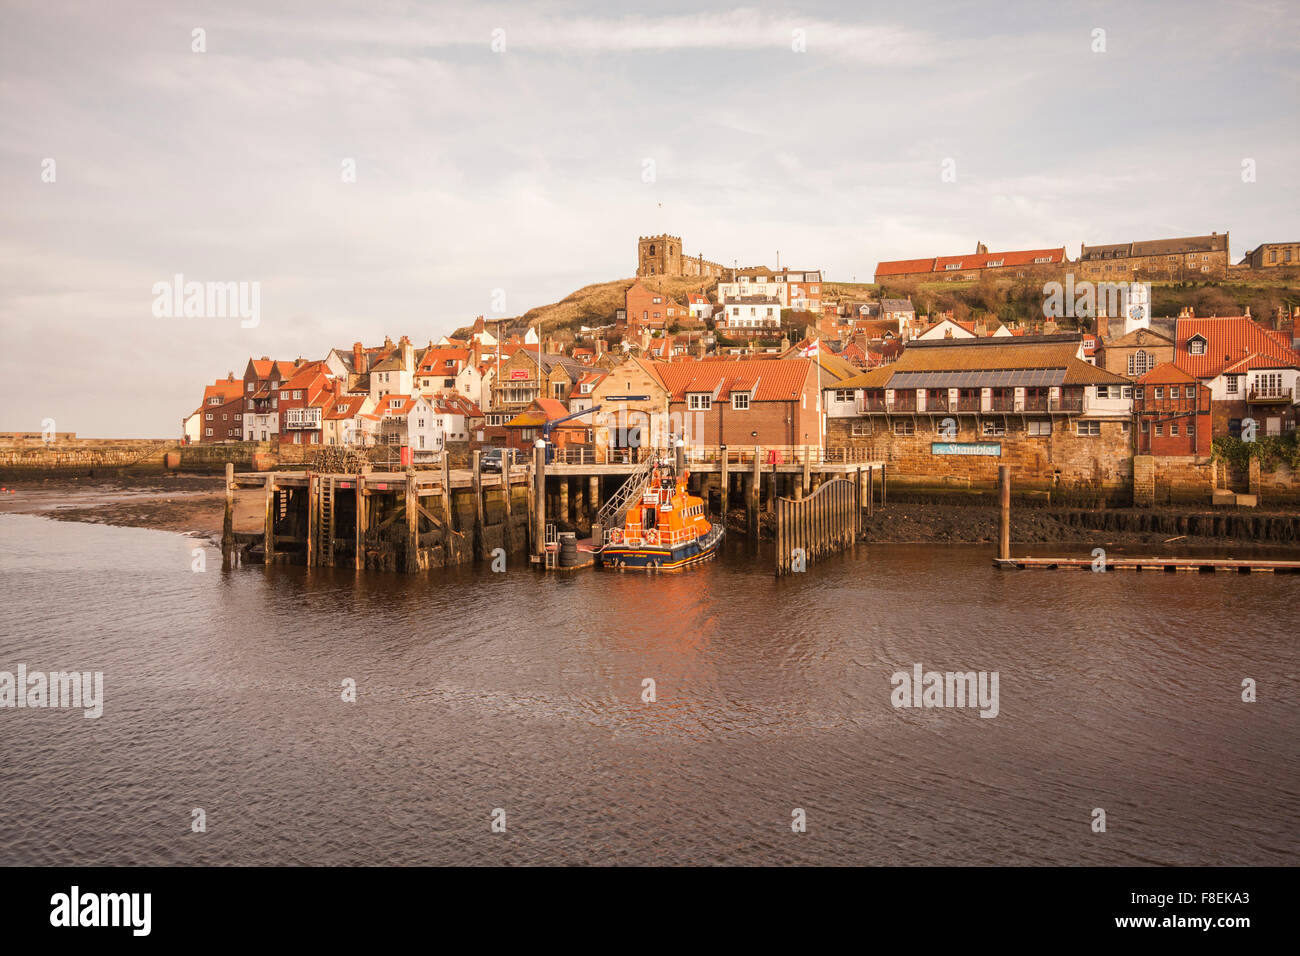 View of the East side of Whitby showing cliff side houses,St.Marys Church and the Whitby lifeboat berthed in the harbour Stock Photo